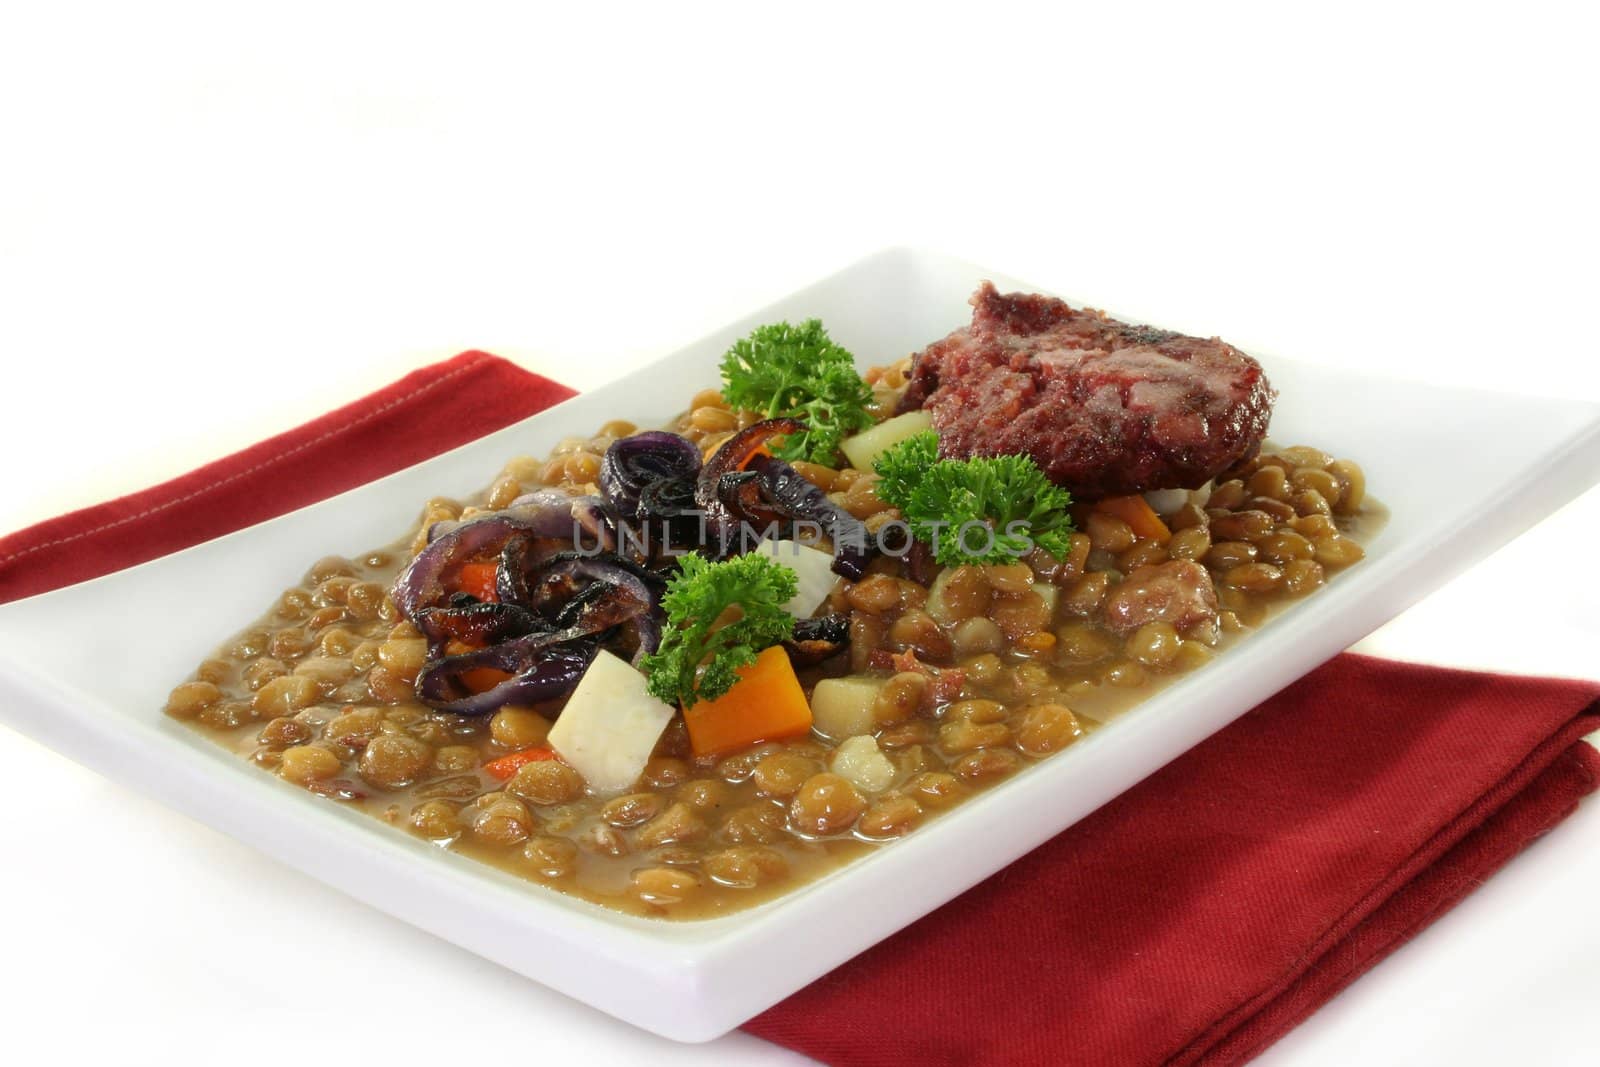 Lentil dish with roasted onion and black pudding